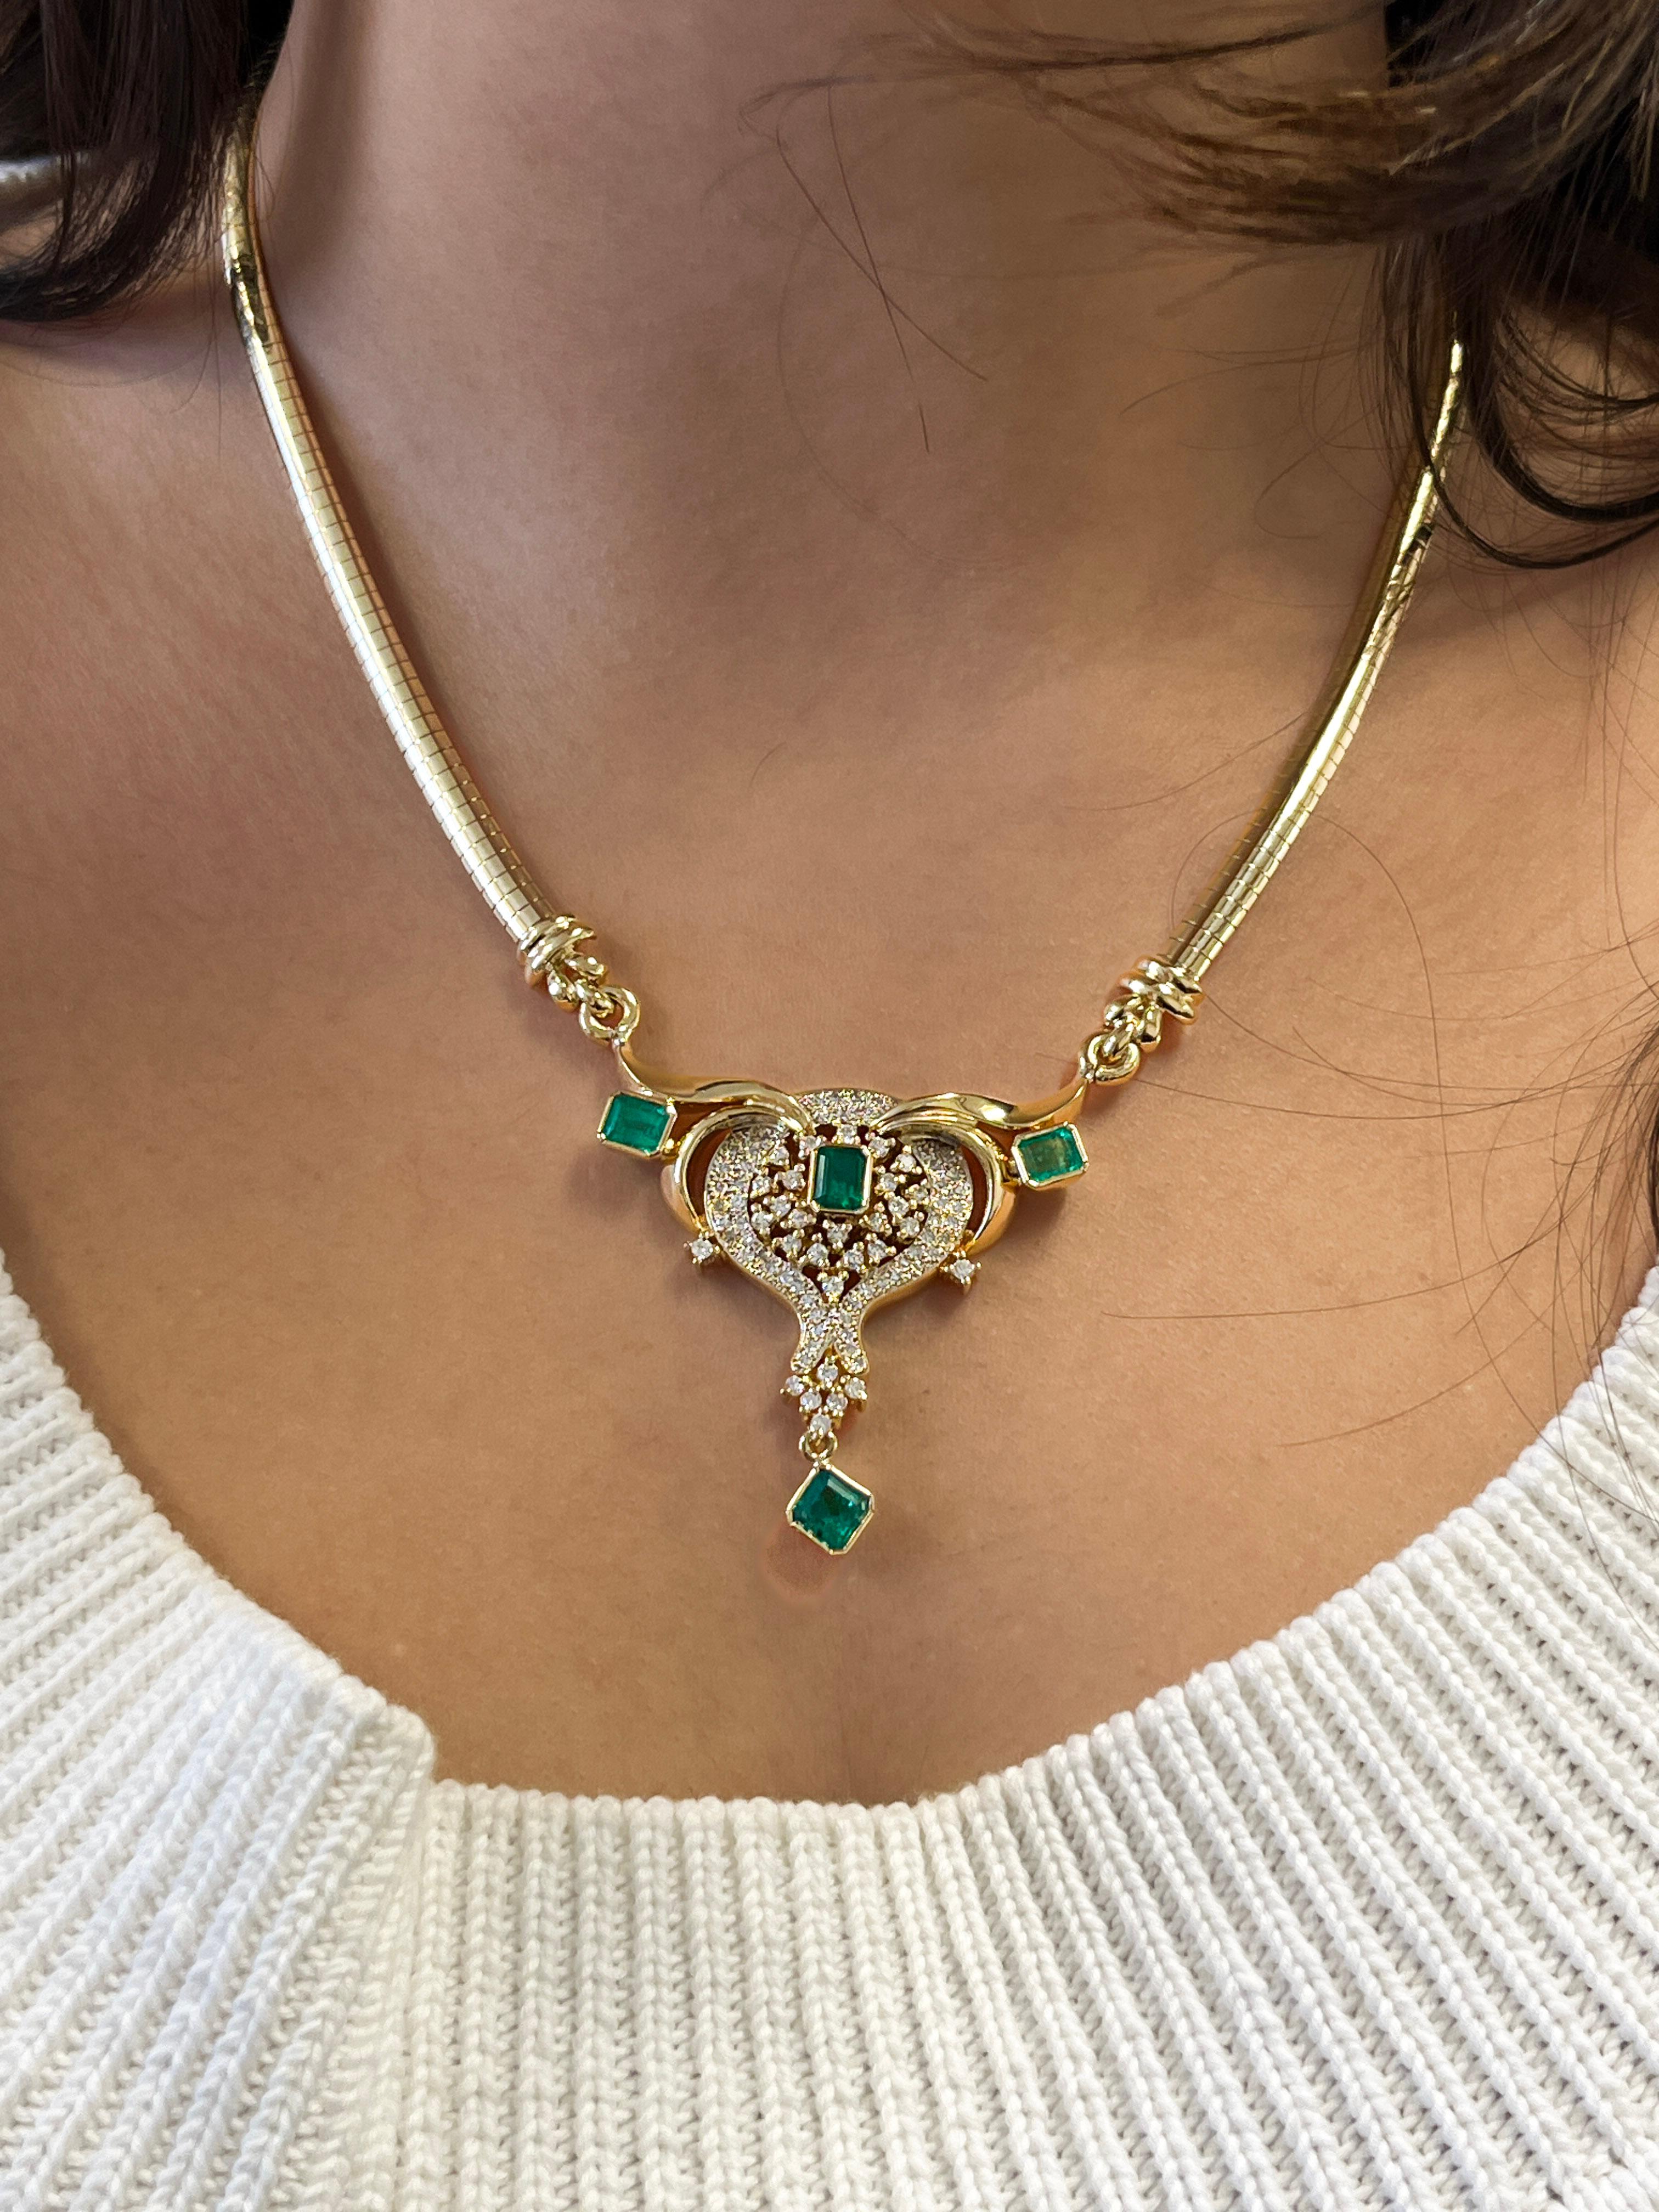 Retro Vintage 5 Carat Emerald & Diamond Necklace in 14K Yellow Gold For Sale